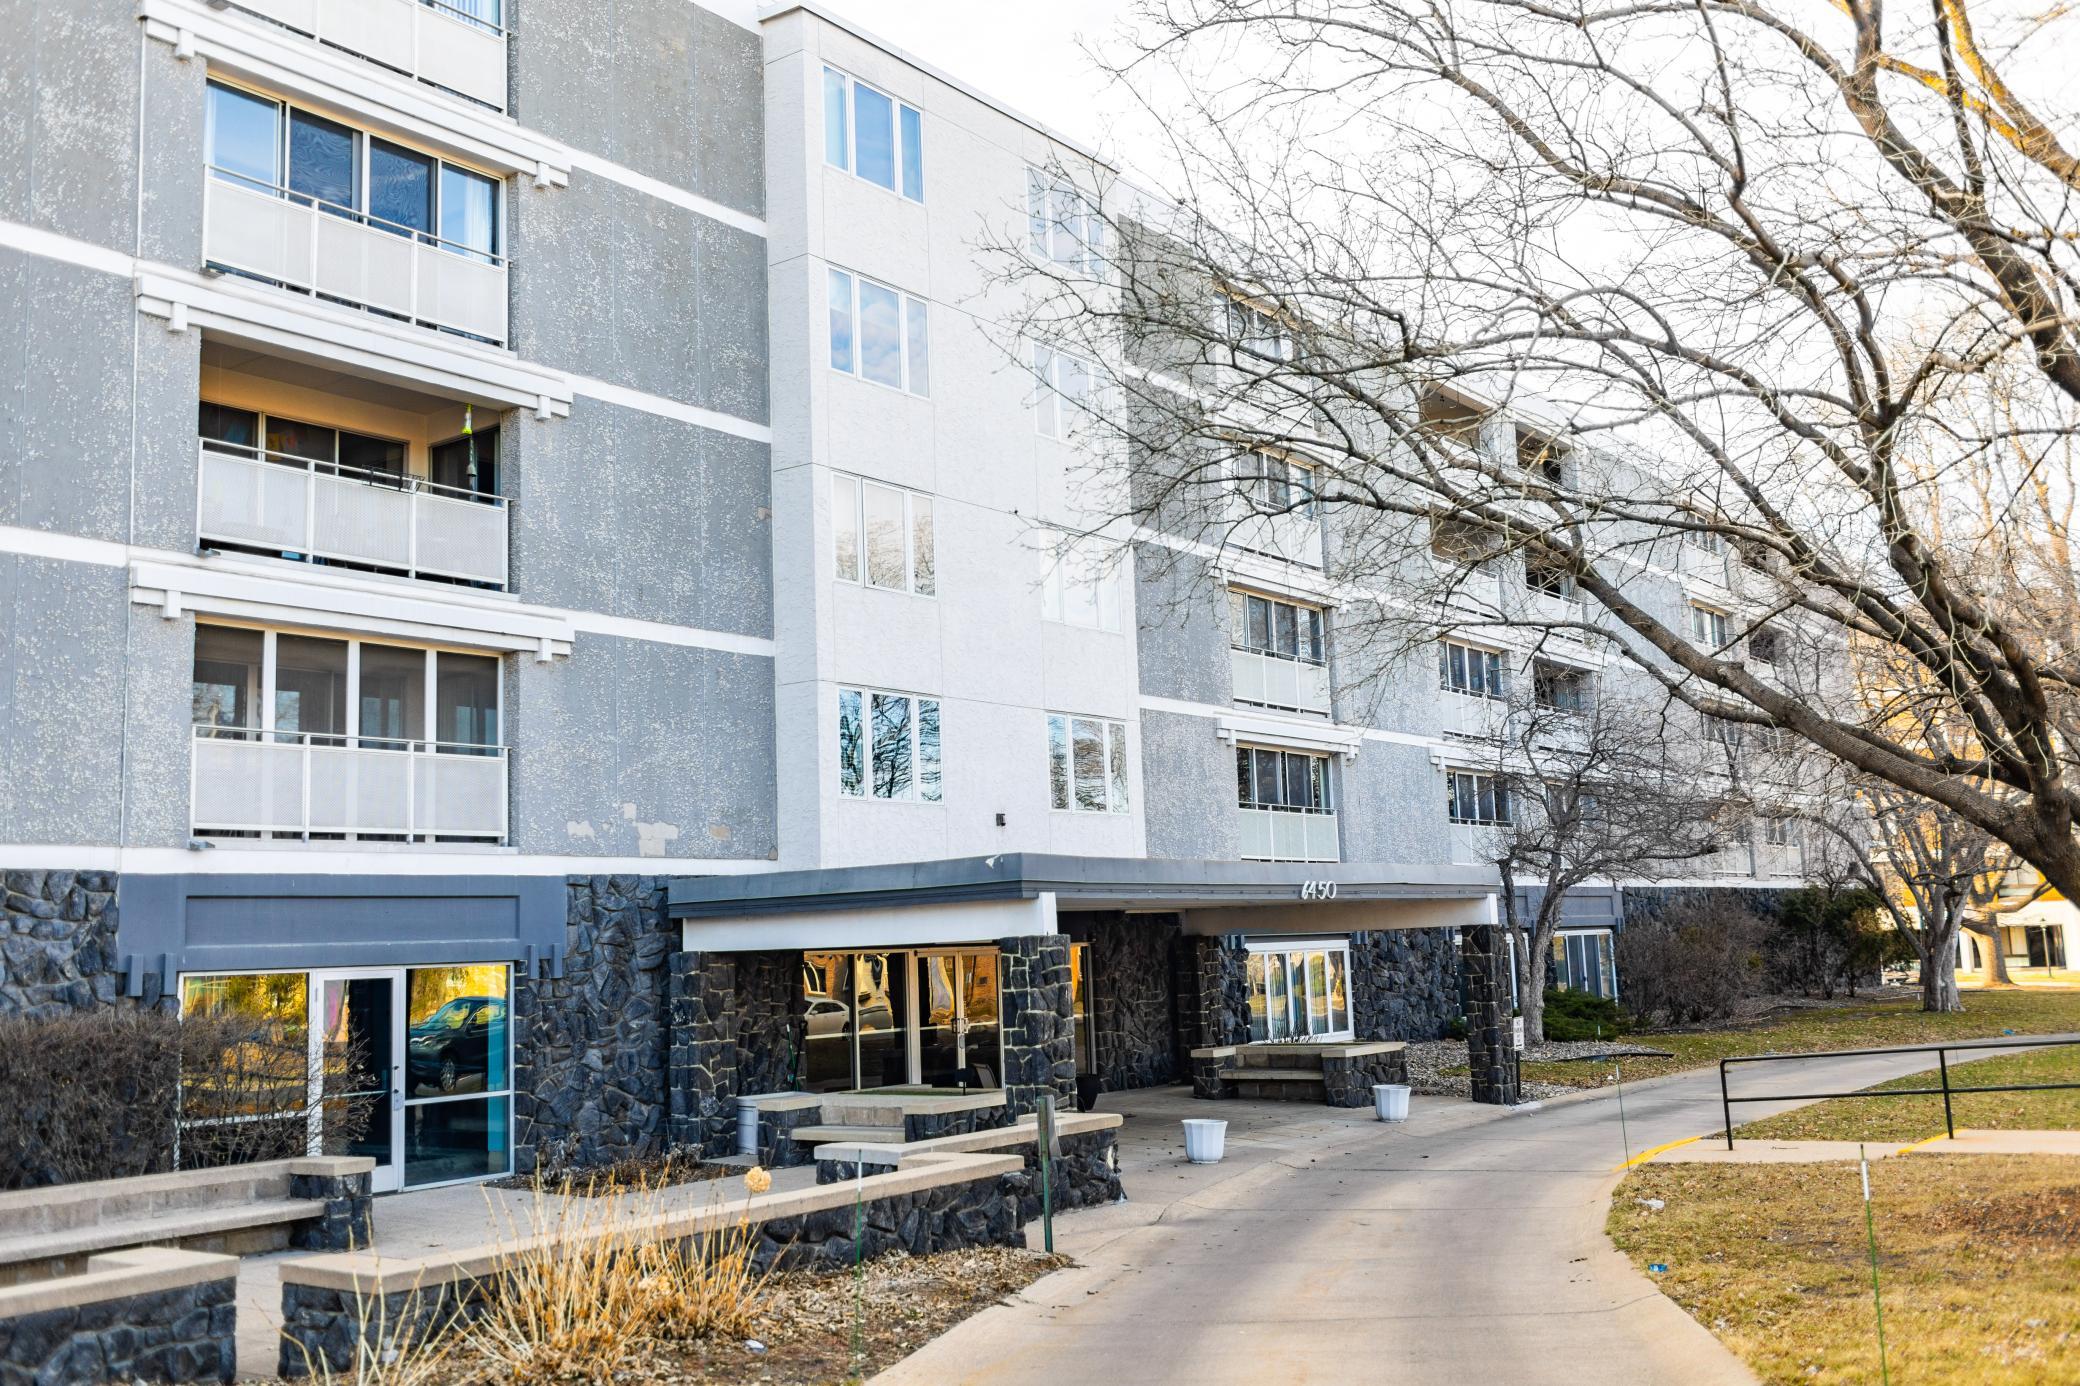 Enjoy living at The York of Edina, conveniently located just off Xerxes Ave and 64th Street. Walk to Southdale, Southdale Square, Cub, Centennial Lakes, Galleria & Target, all offering a variety of shopping and restaurants.